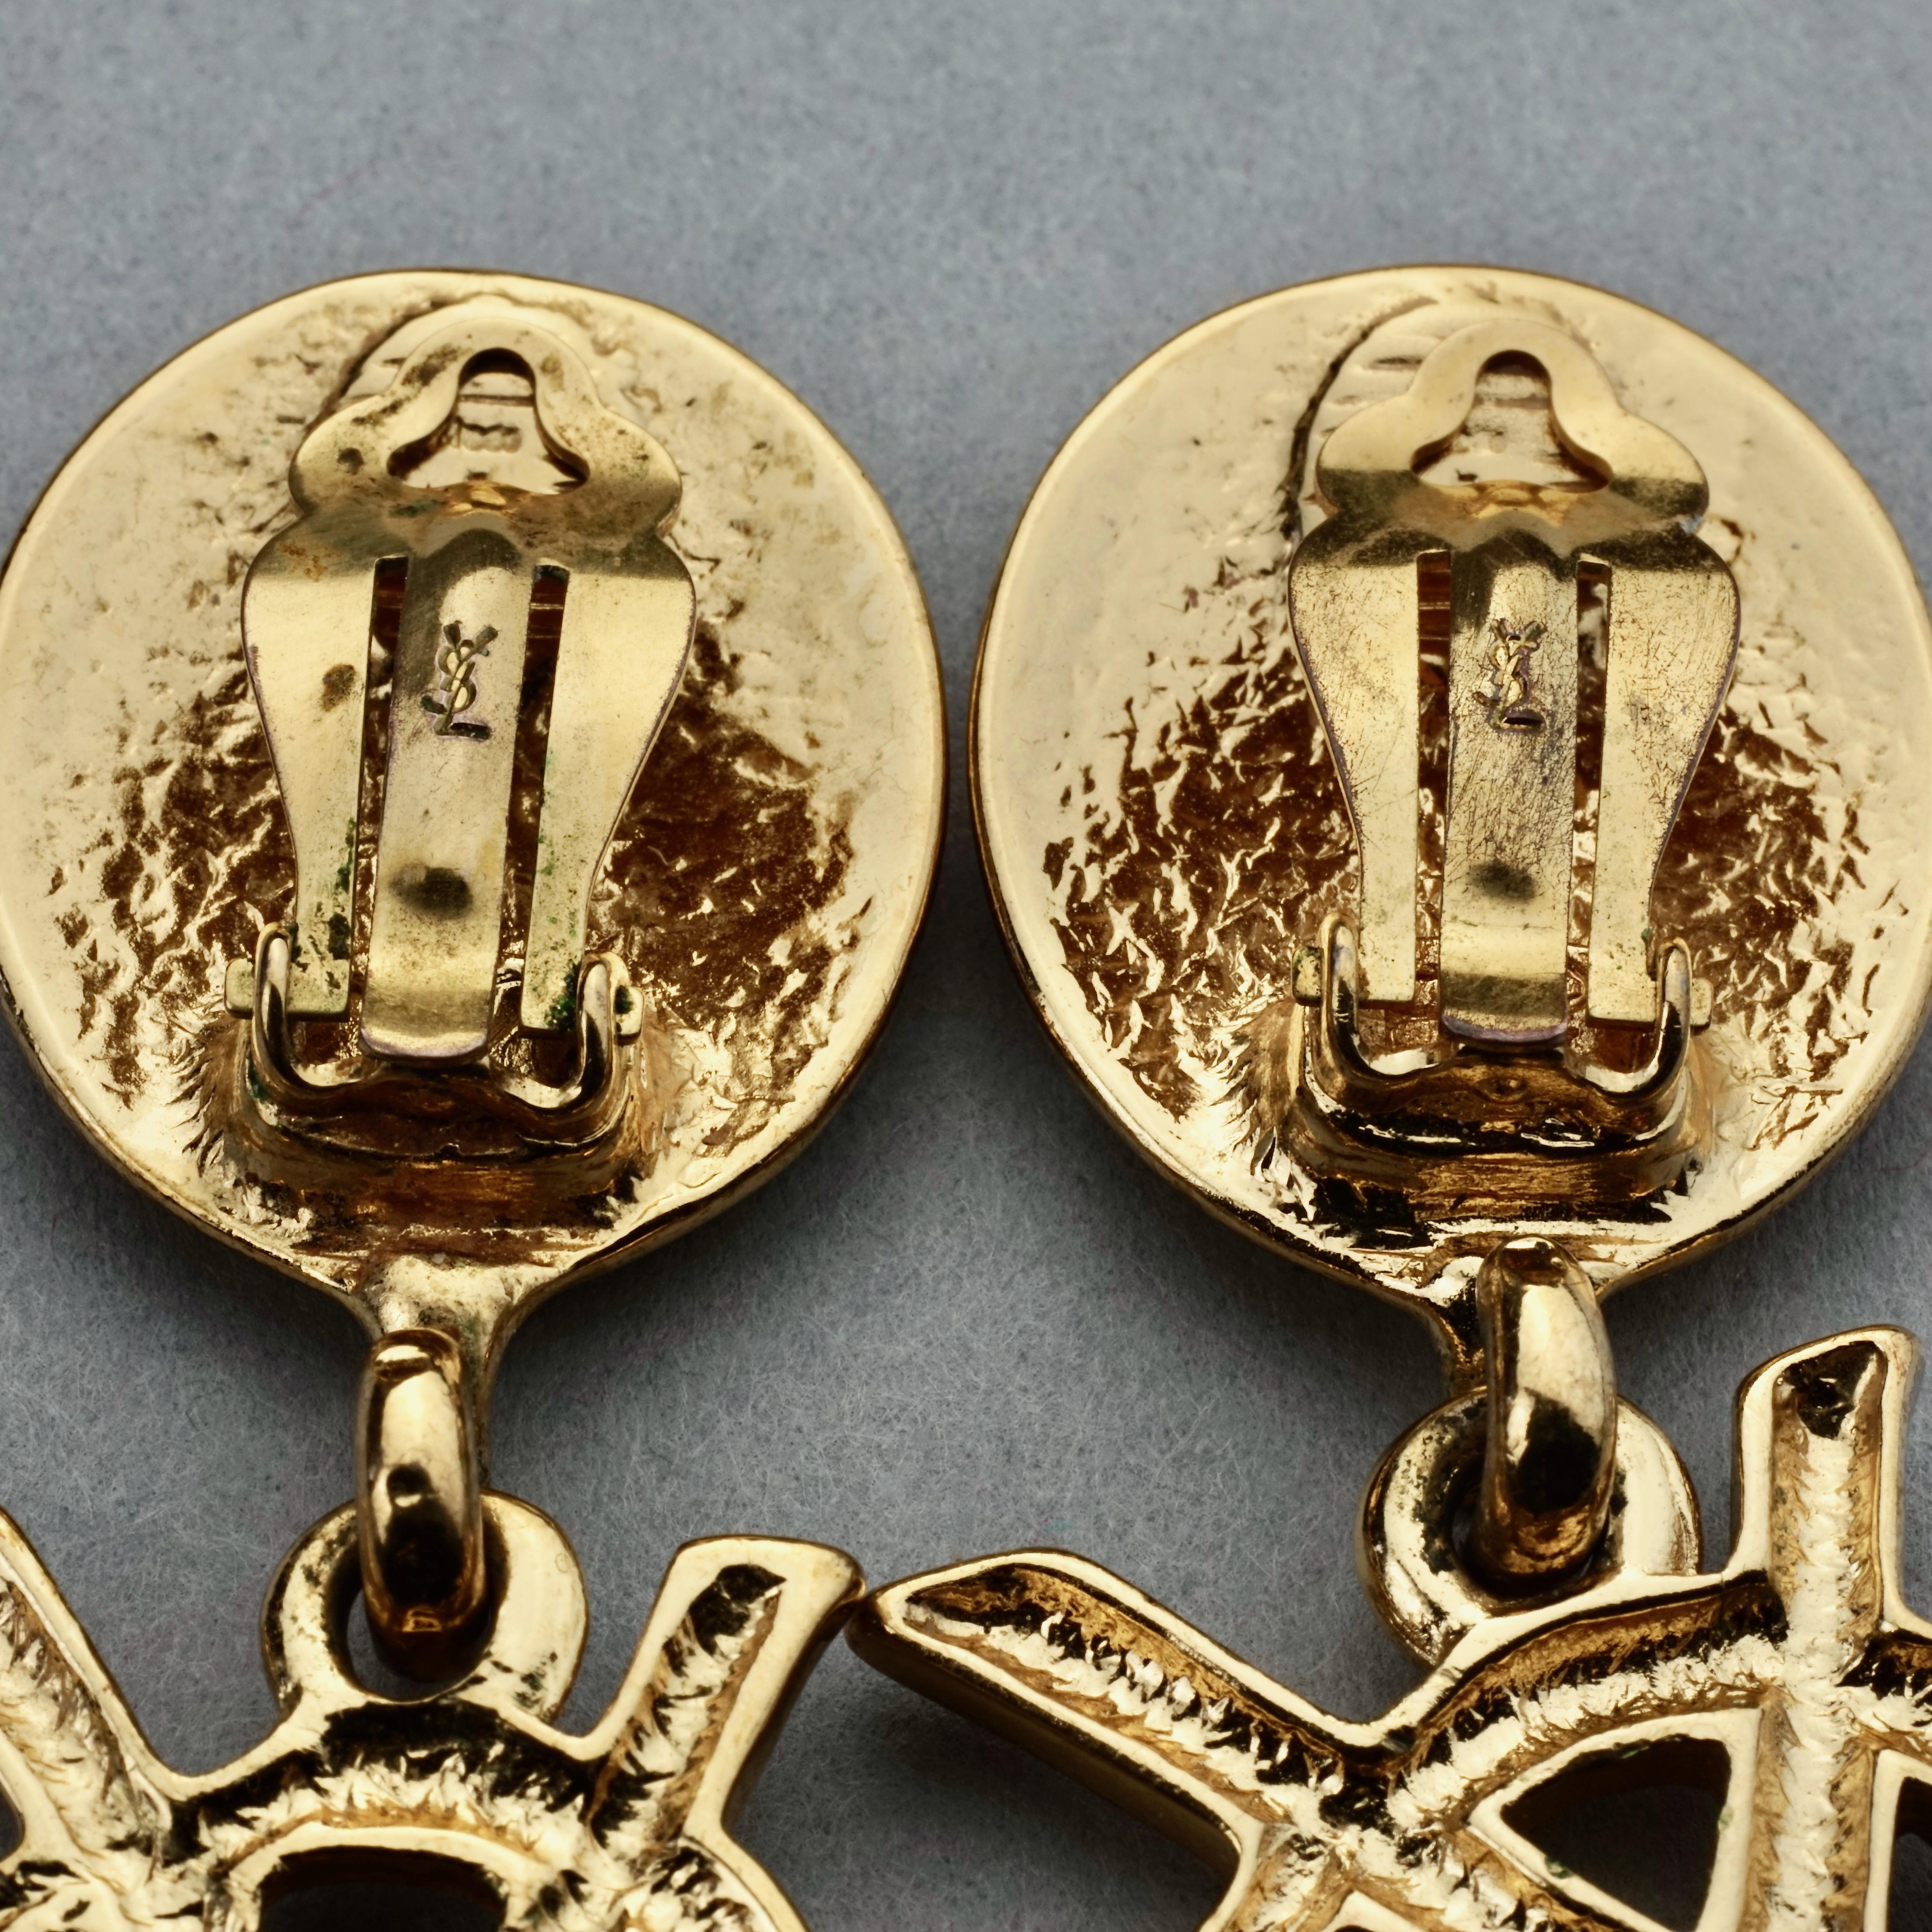 Vintage YVES SAINT LAURENT Ysl Iconic Logo Drop Earrings - Sex and The City 3